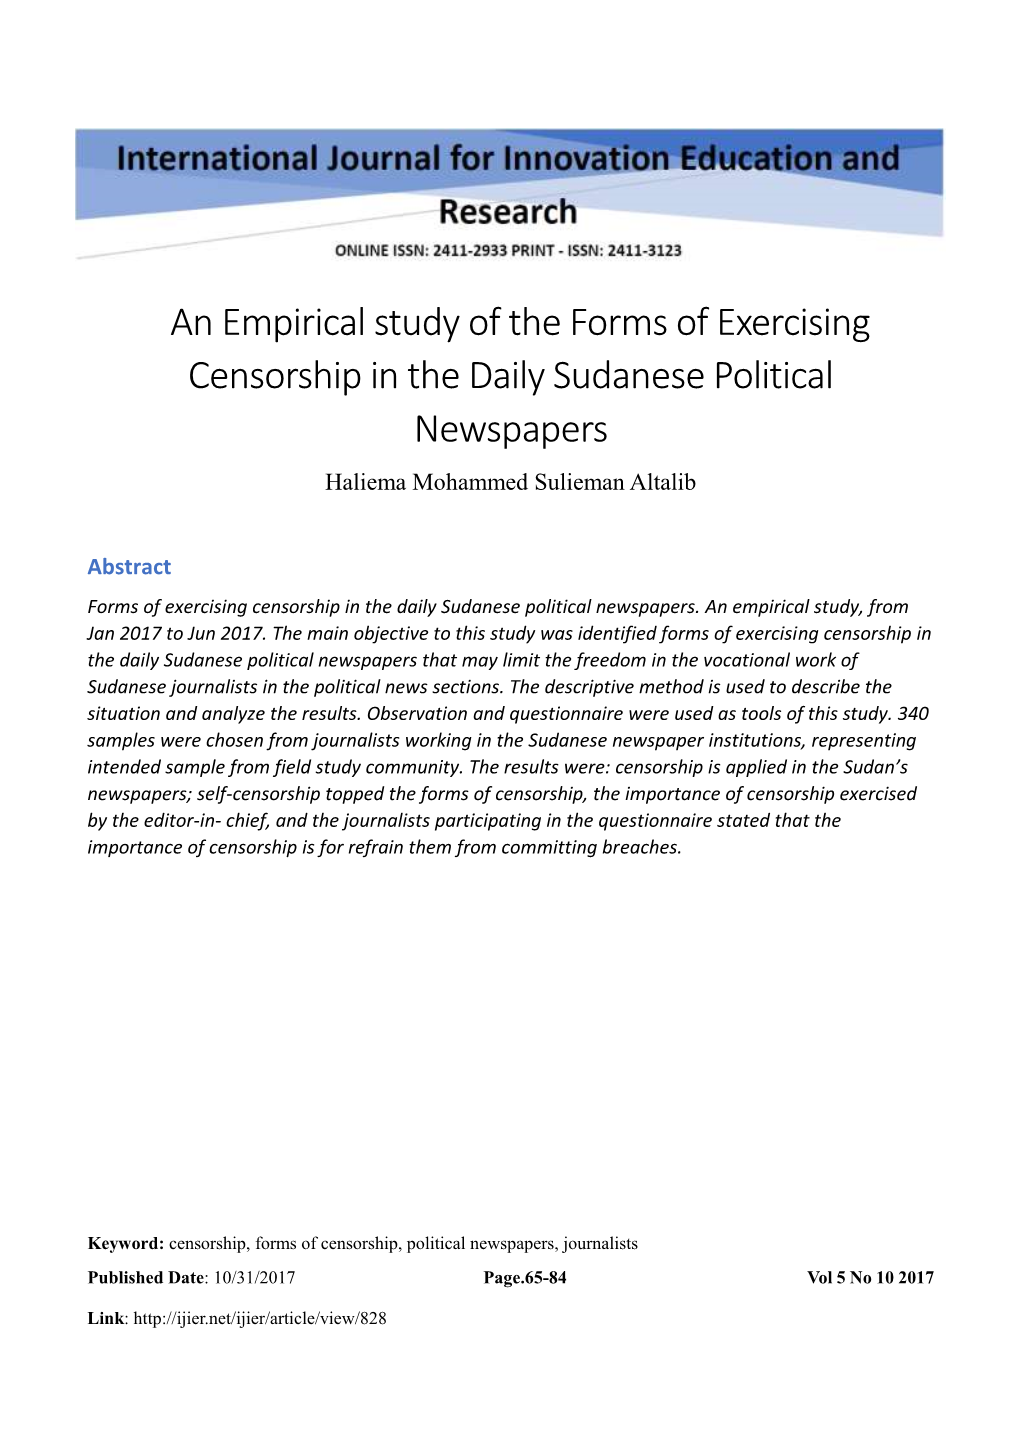 An Empirical Study of the Forms of Exercising Censorship in the Daily Sudanese Political Newspapers